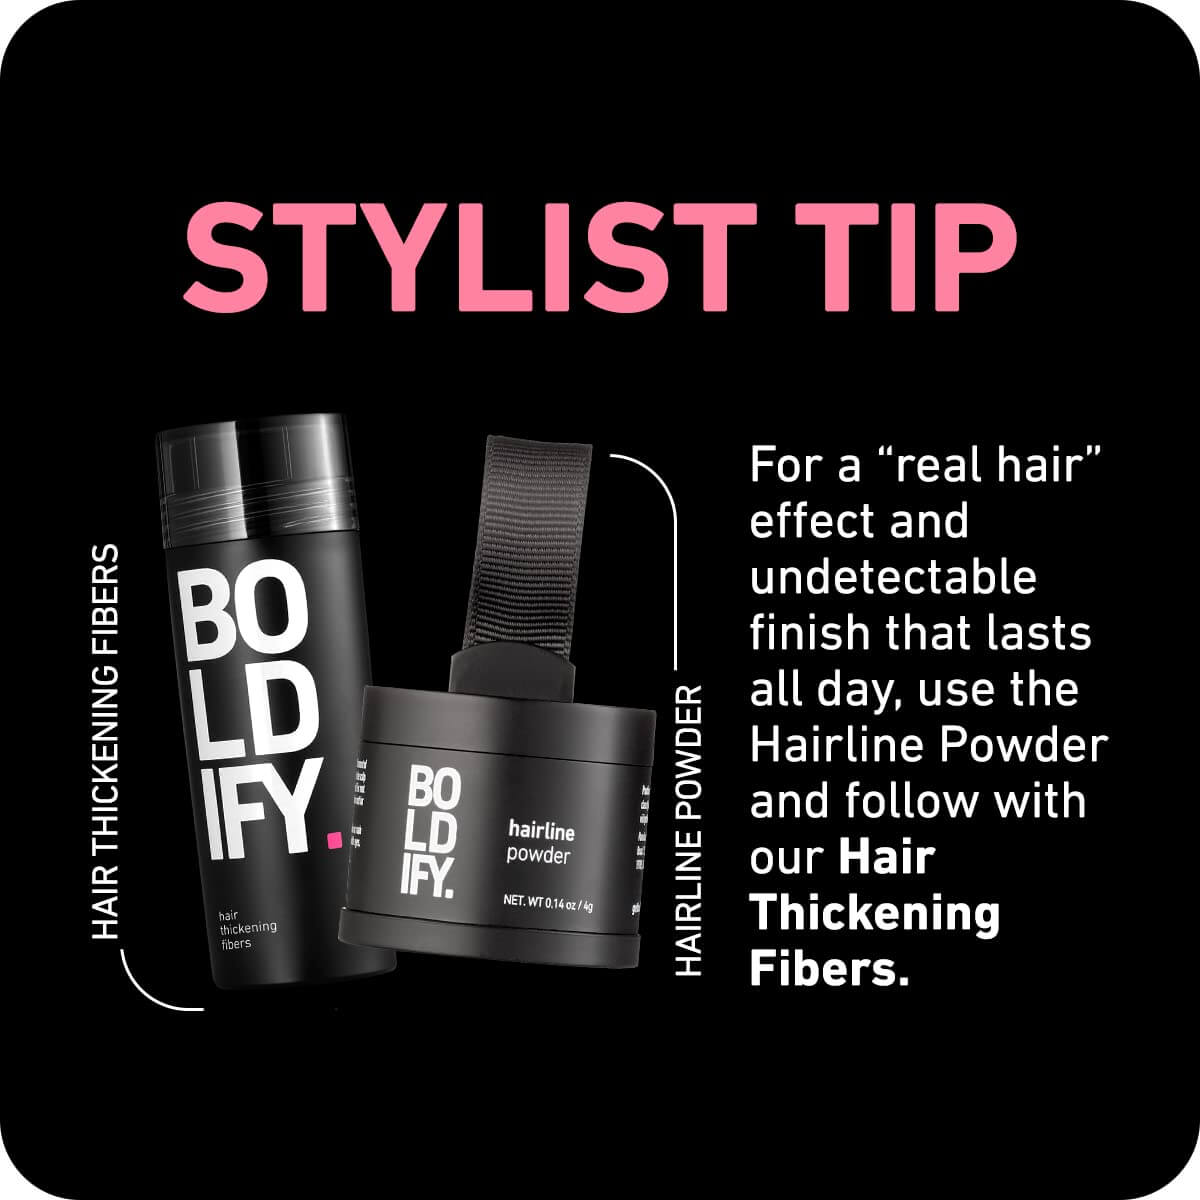 Boldify Hairline Powder, Instantly Conceals Hair Loss - 4 g